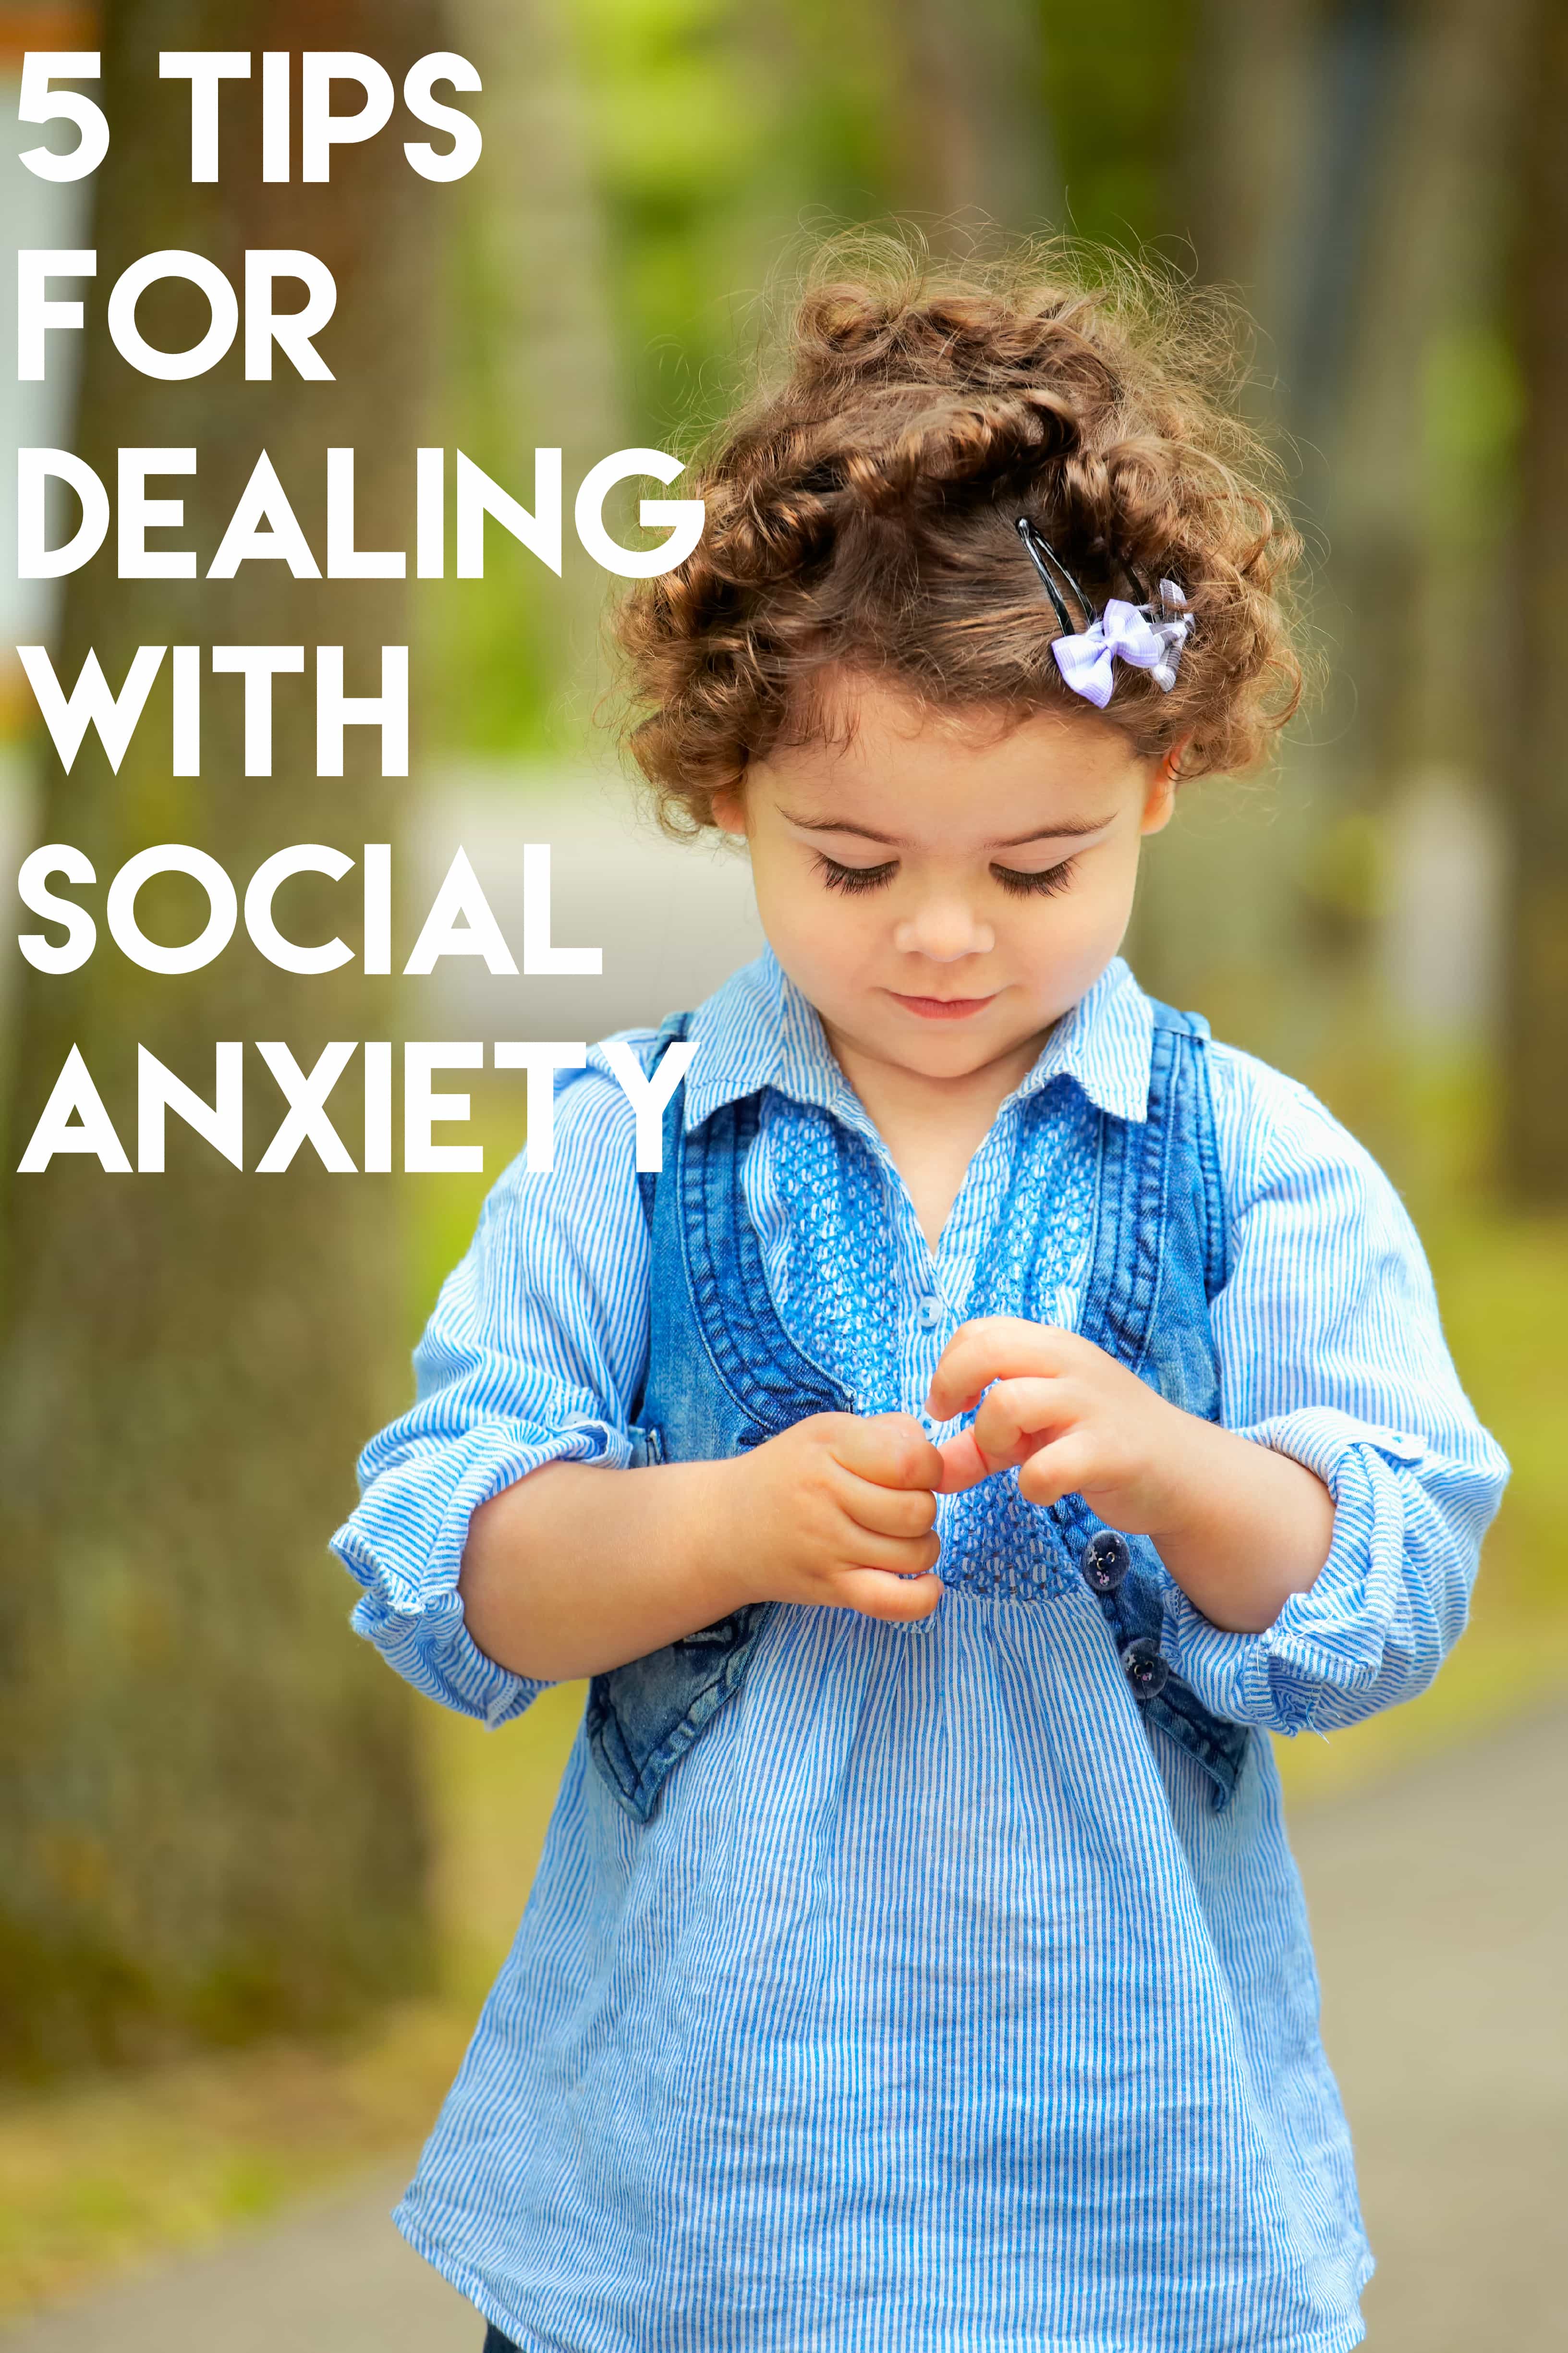 5 Tips For Dealing With Social Anxiety